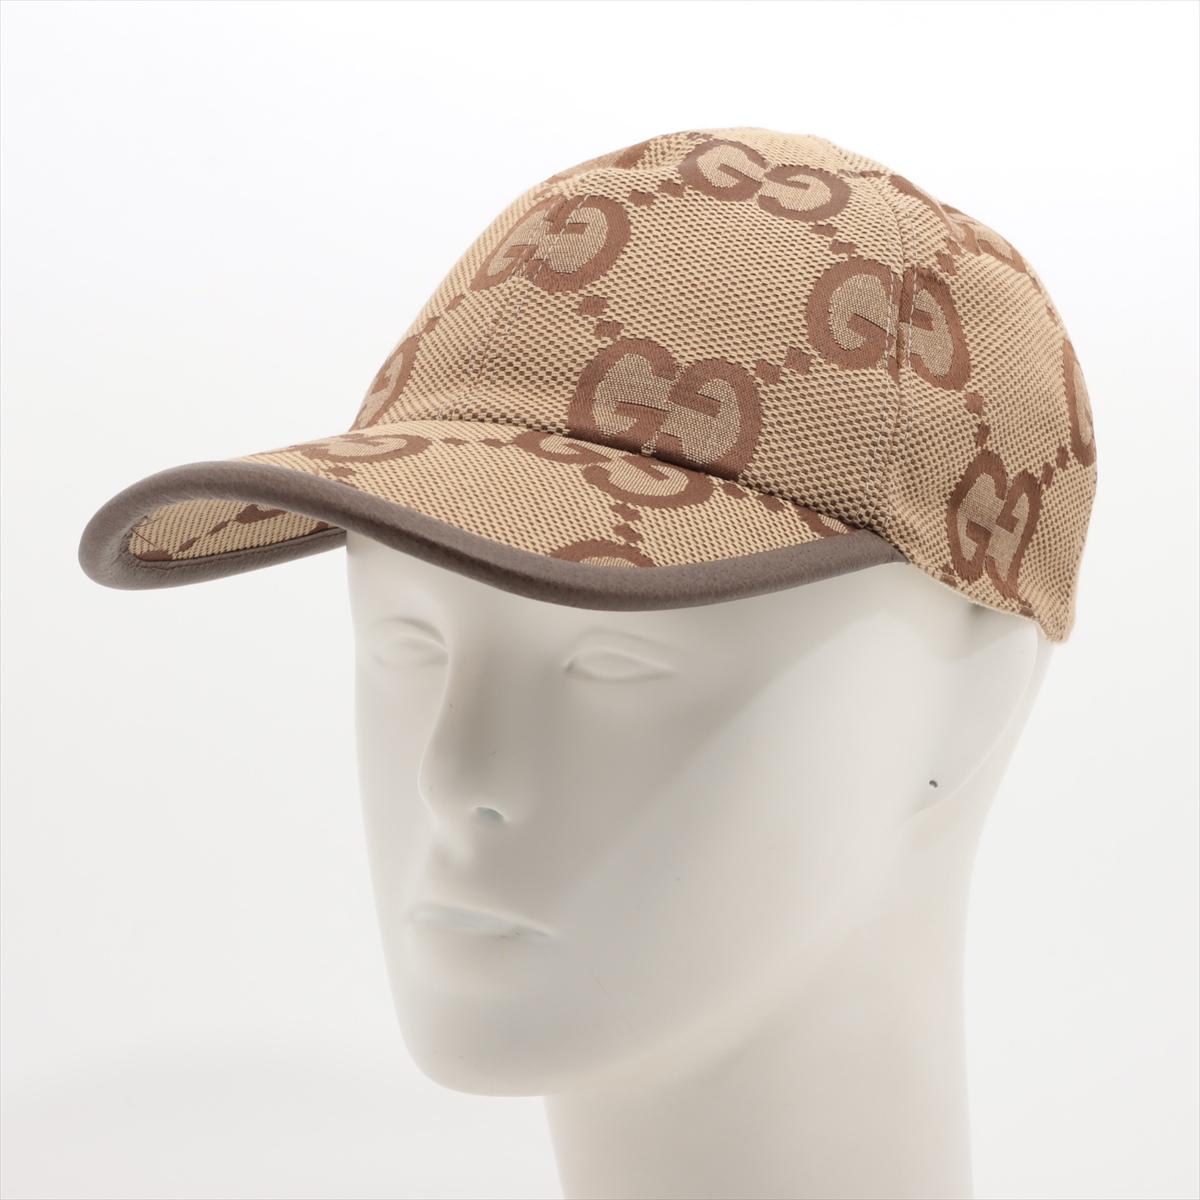 The Gucci Jumbo GG Canvas Baseball Hat in Camel x Ebony is a stylish and iconic accessory that combines luxury with sporty flair. Crafted from durable canvas adorned with Gucci's signature jumbo GG monogram pattern, the baseball hat exudes